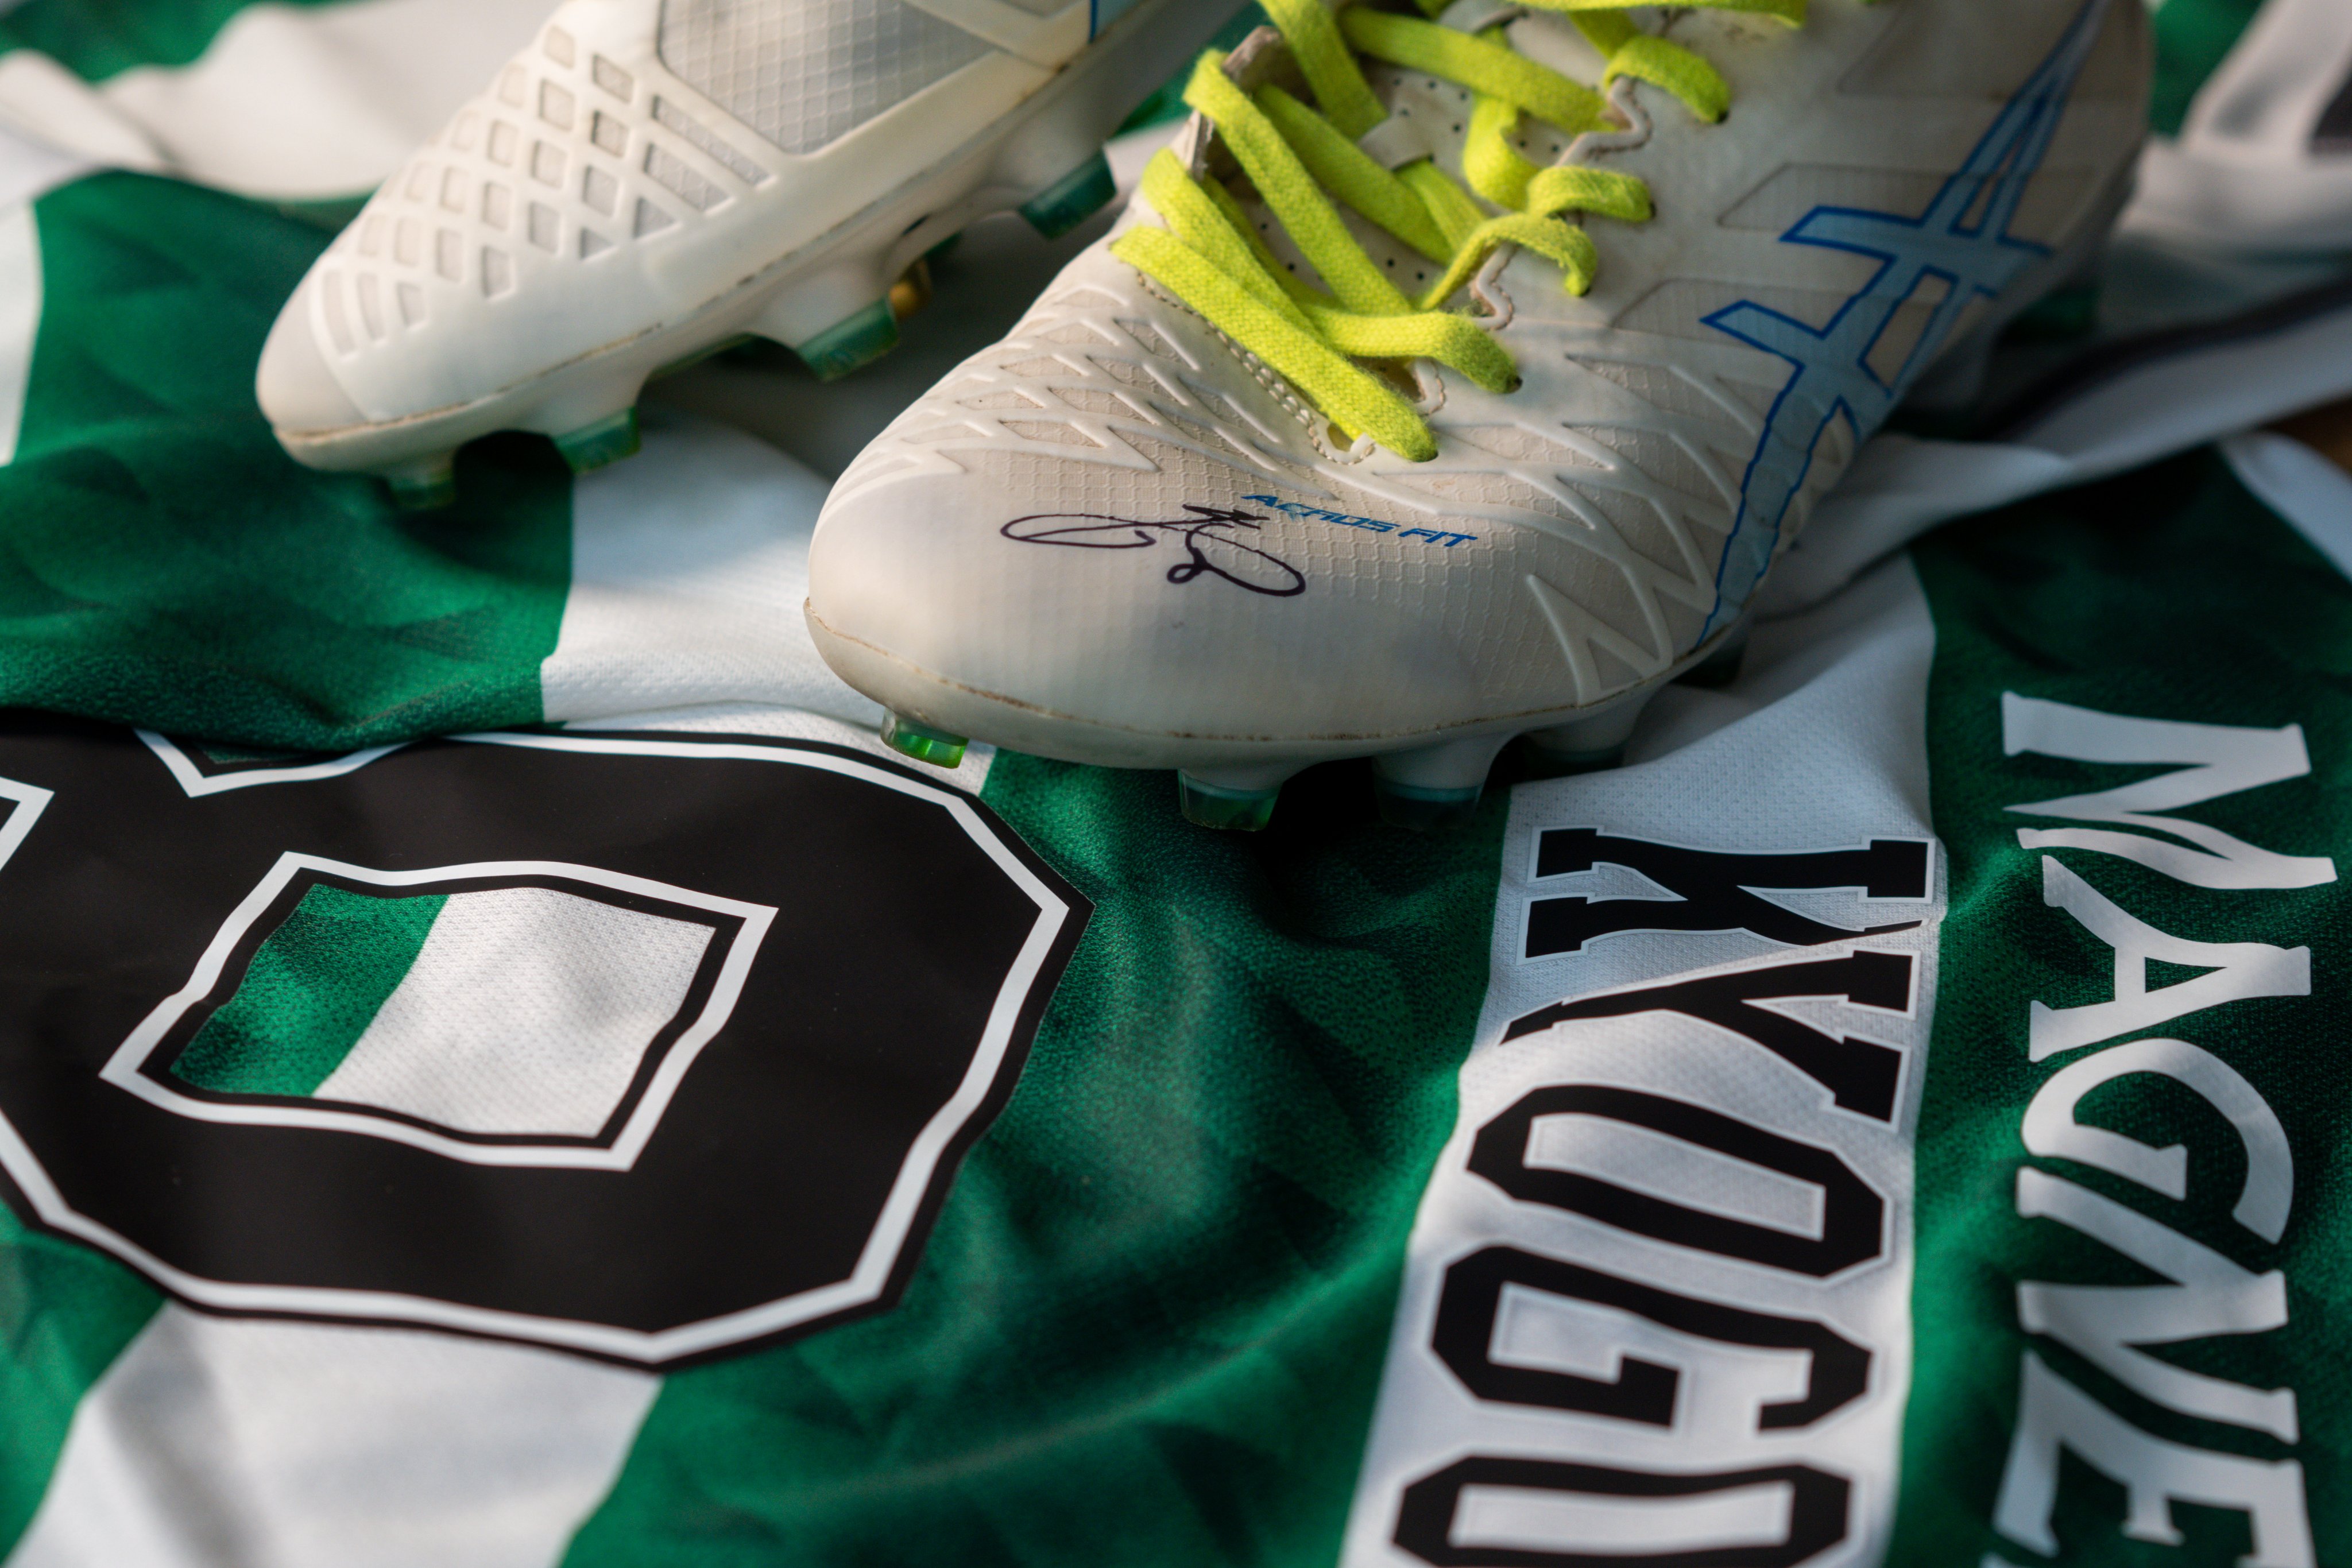 Kyogo Furuhashi 古橋 亨梧 on X: 🍀 GIVEAWAY ALERT 🍀 Get the chance to win a  thank you for your support! 1) matchworn & signed boots + jersey 2)  matchworn & signed